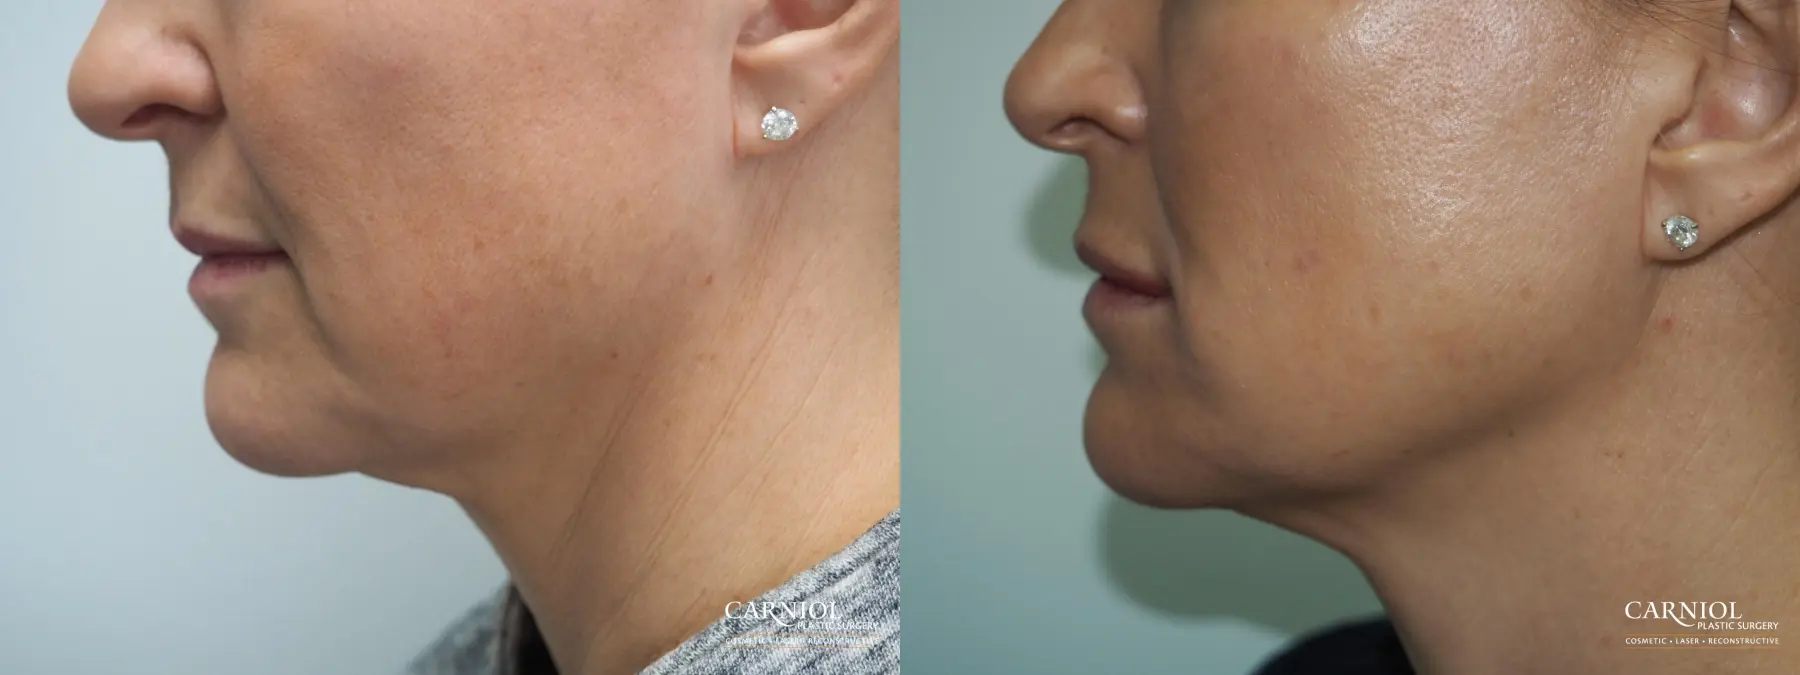 Non-Surgical Mini-Facelift: Patient 2 - Before and After  